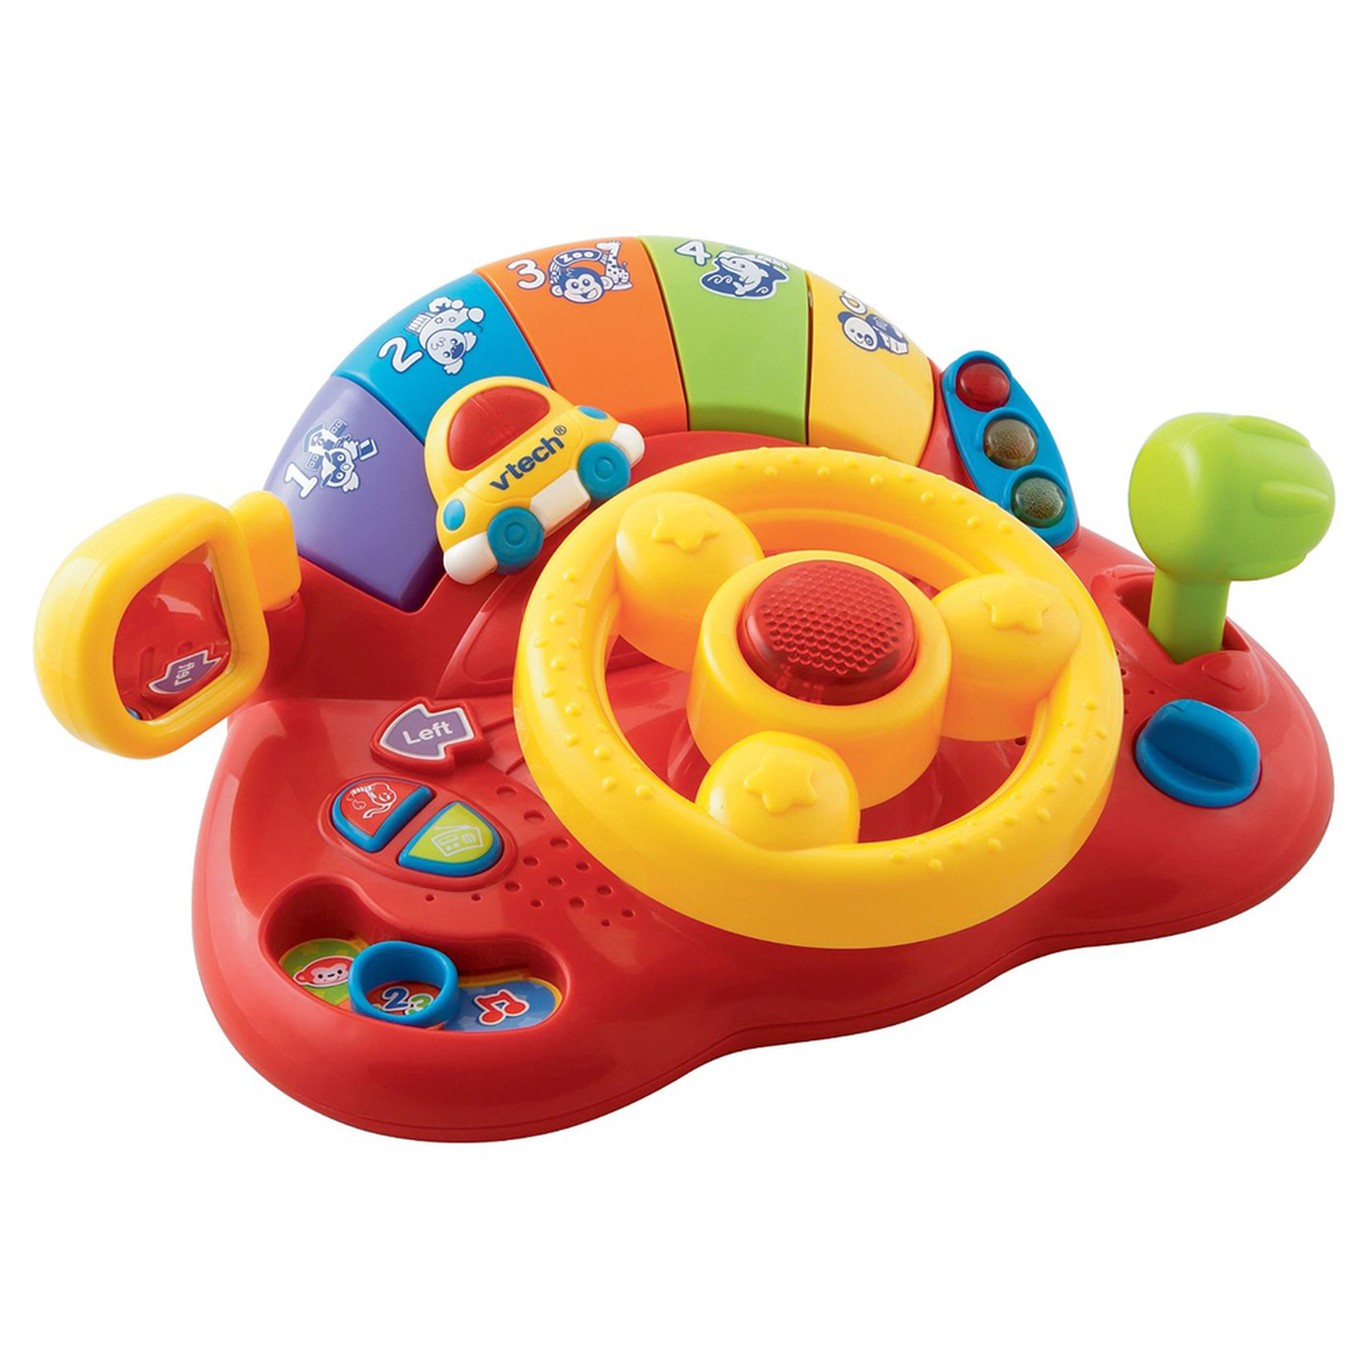 Baby einstein discover and play activity center user manual 2017